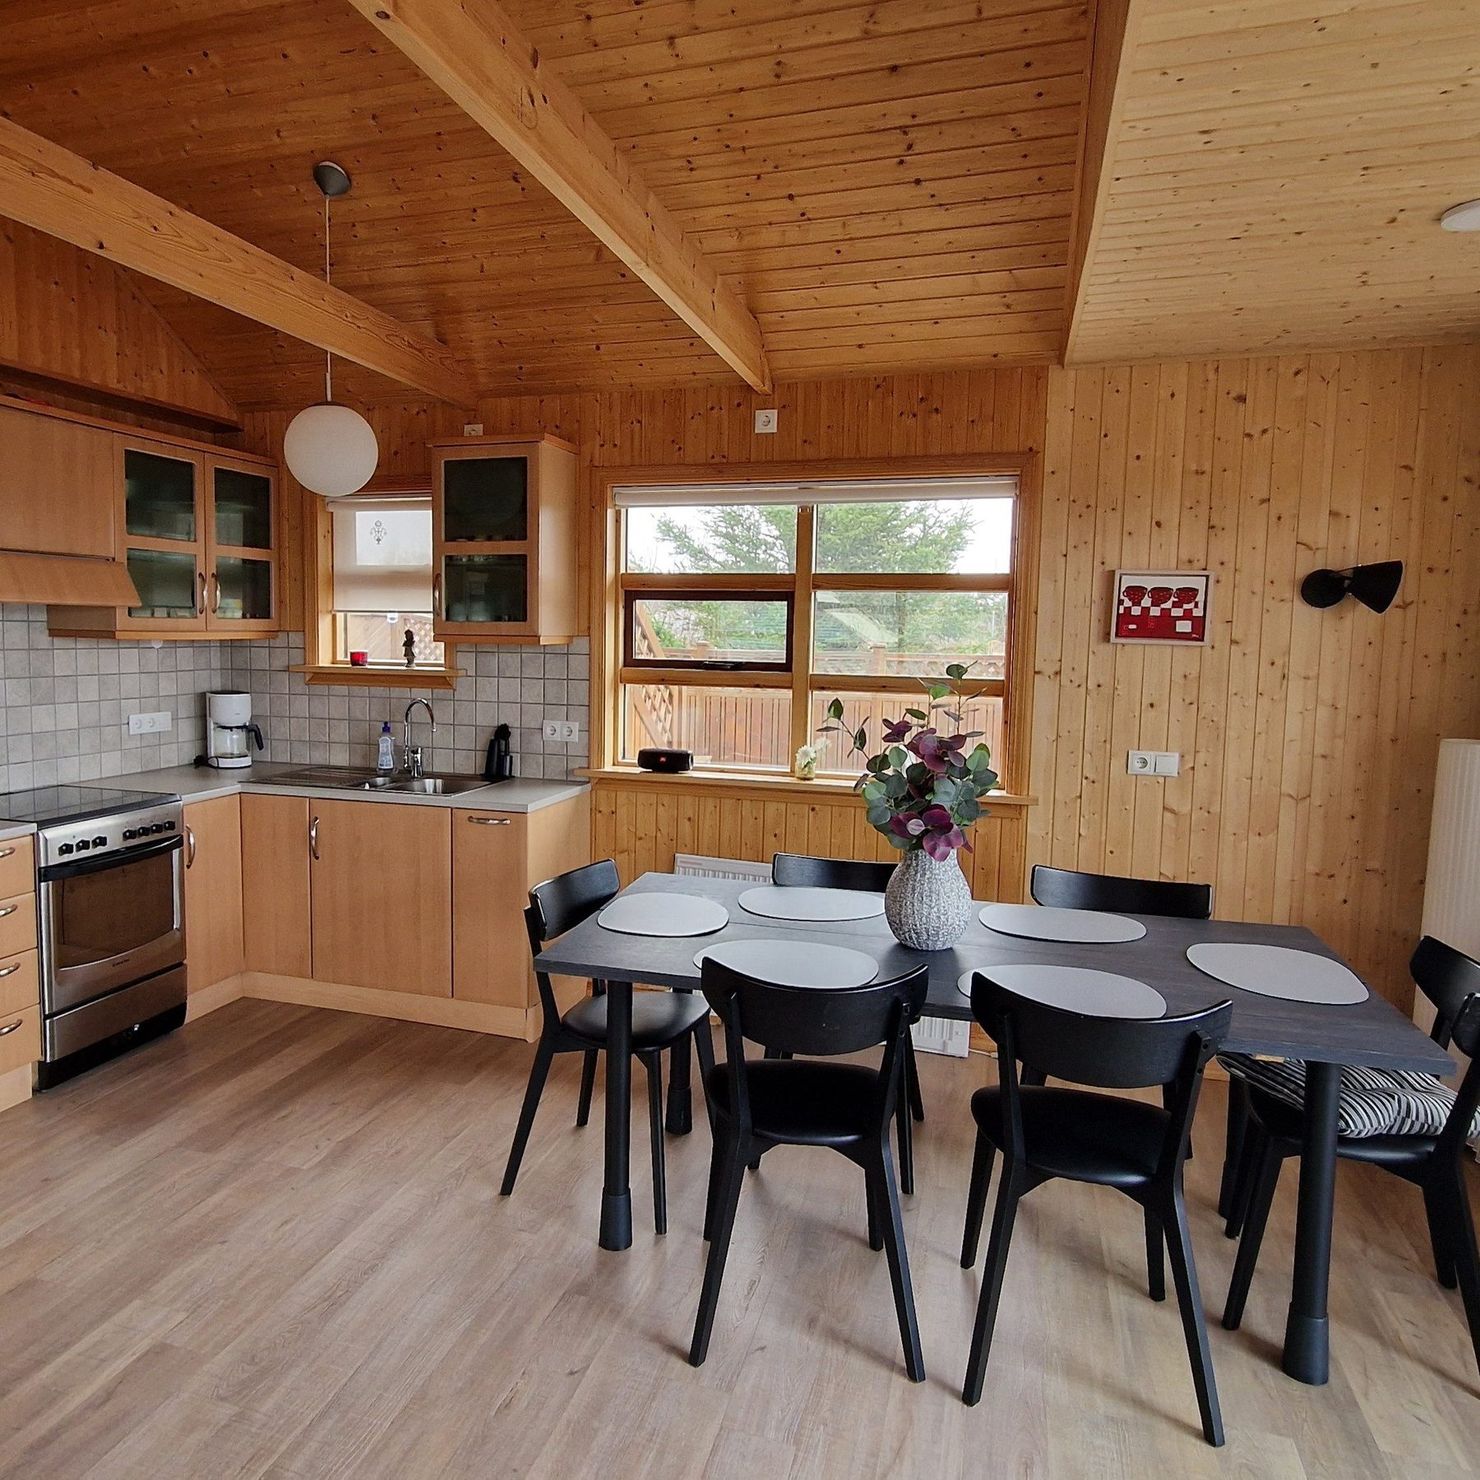 Modern corner kitchen with large fridge and dining table for 6 people